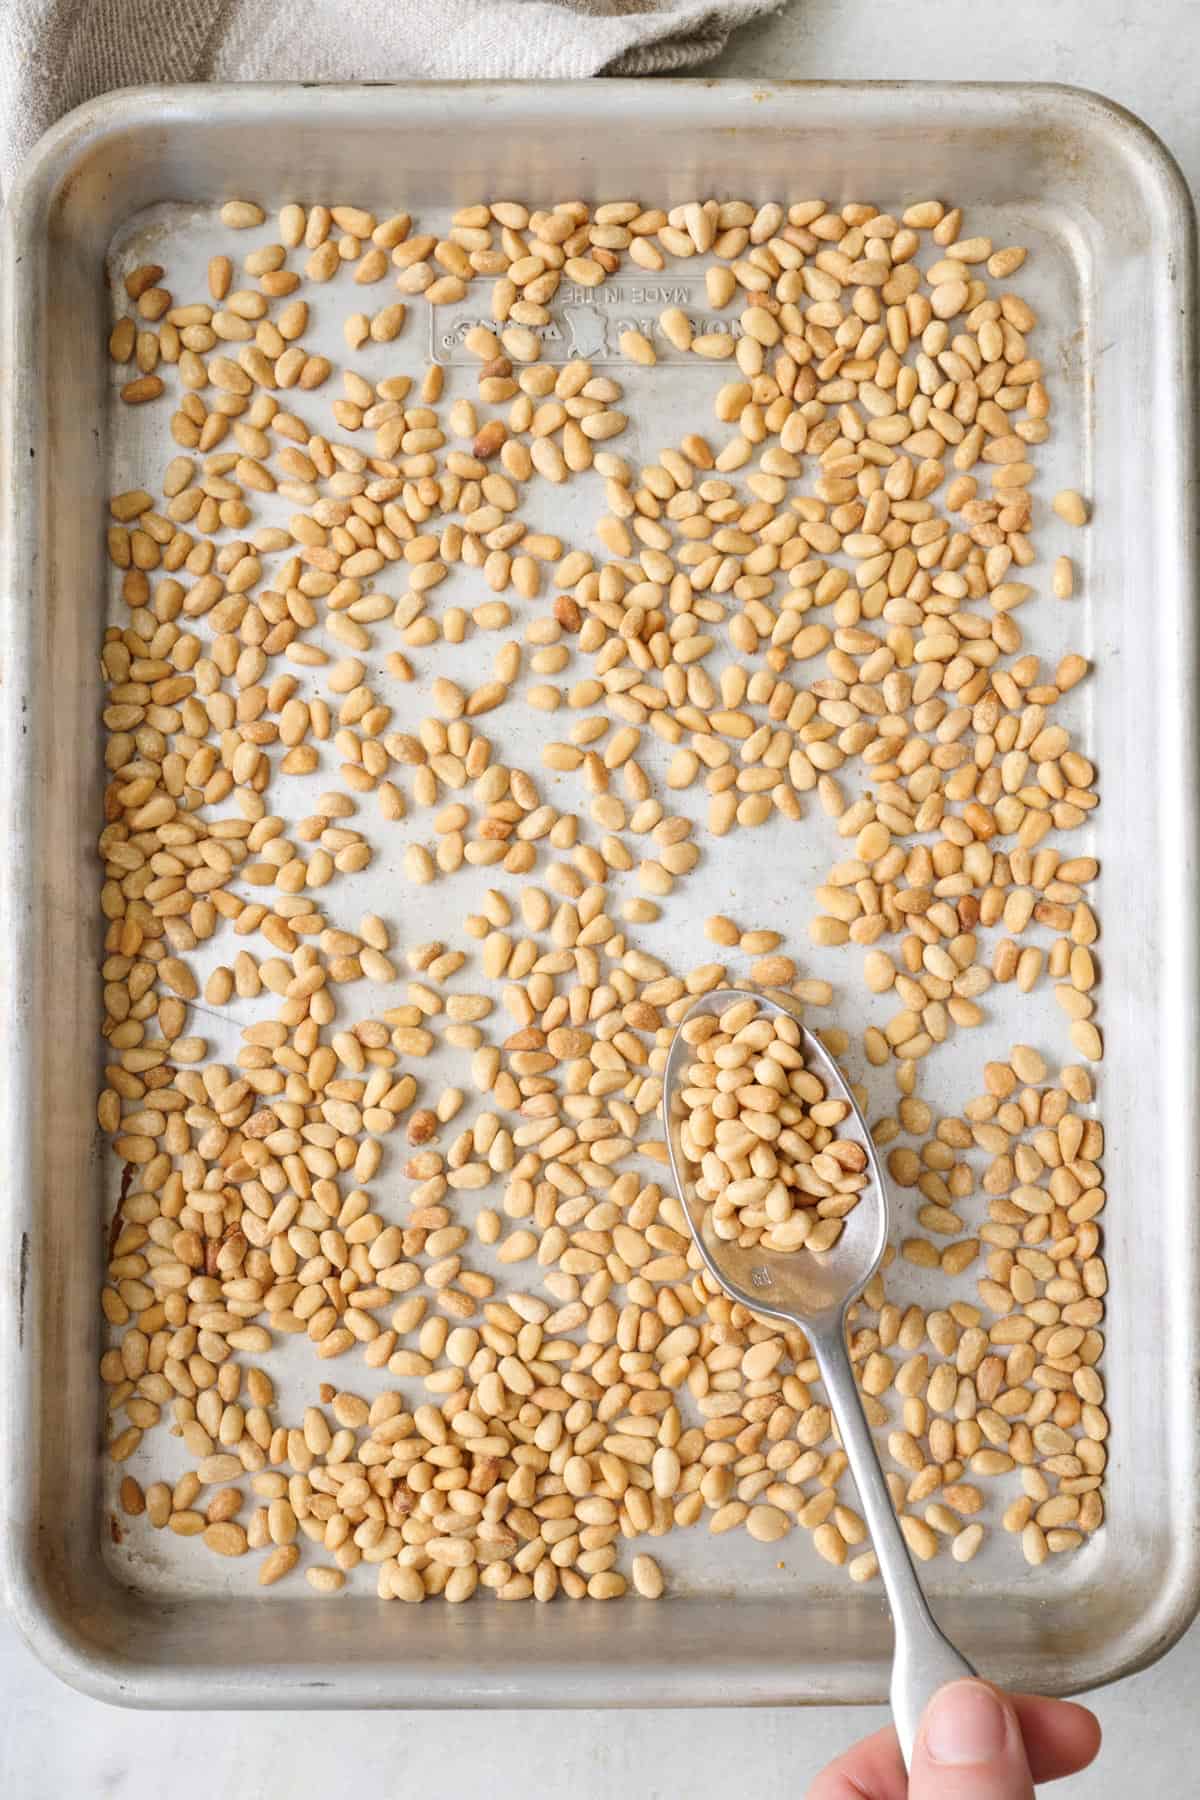 Toasted pine nuts on a sheet pan with a spoon lifting some up.